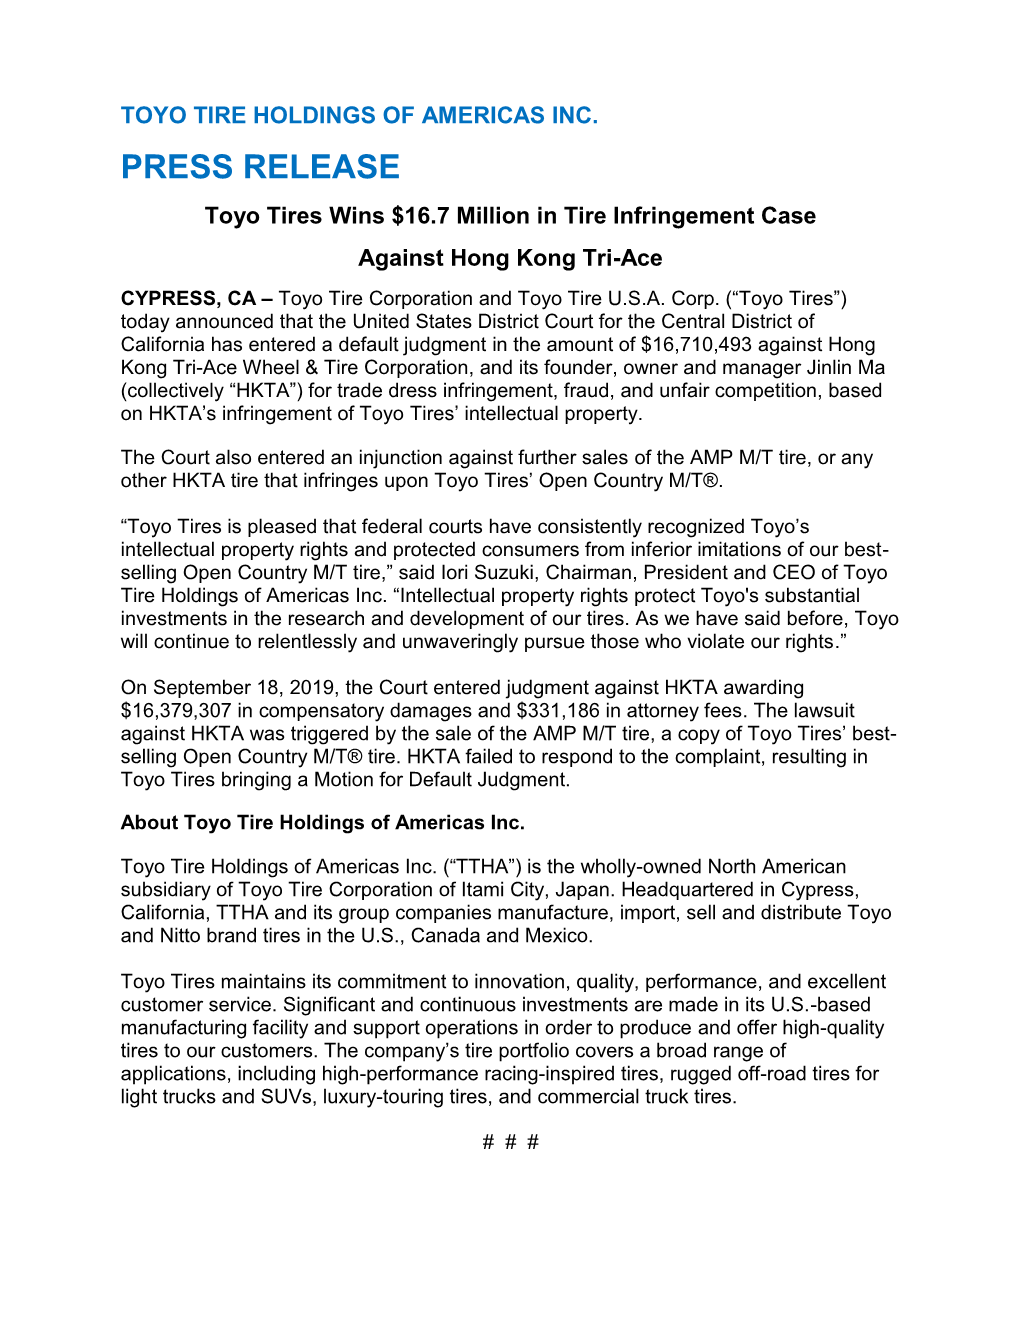 PRESS RELEASE Toyo Tires Wins $16.7 Million in Tire Infringement Case Against Hong Kong Tri-Ace CYPRESS, CA – Toyo Tire Corporation and Toyo Tire U.S.A